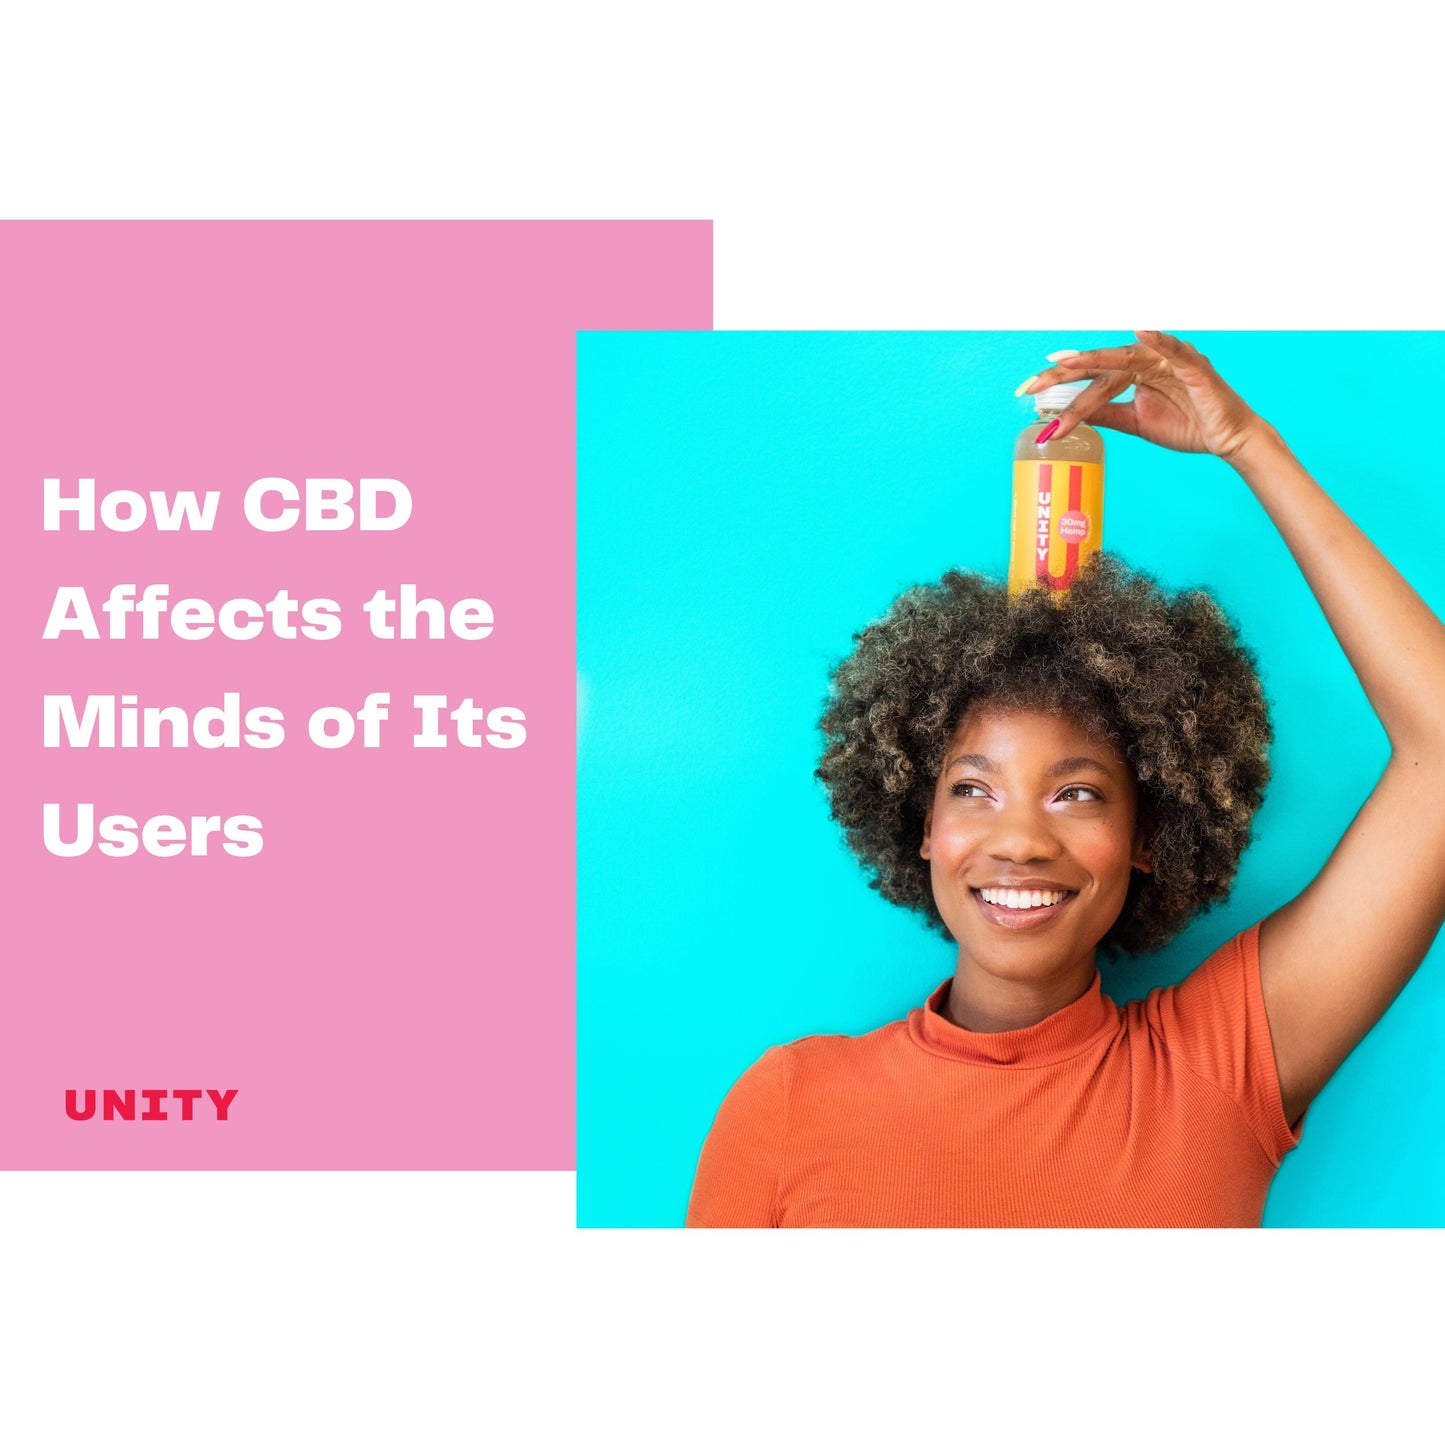 How CBD Affects the Minds of Its Users